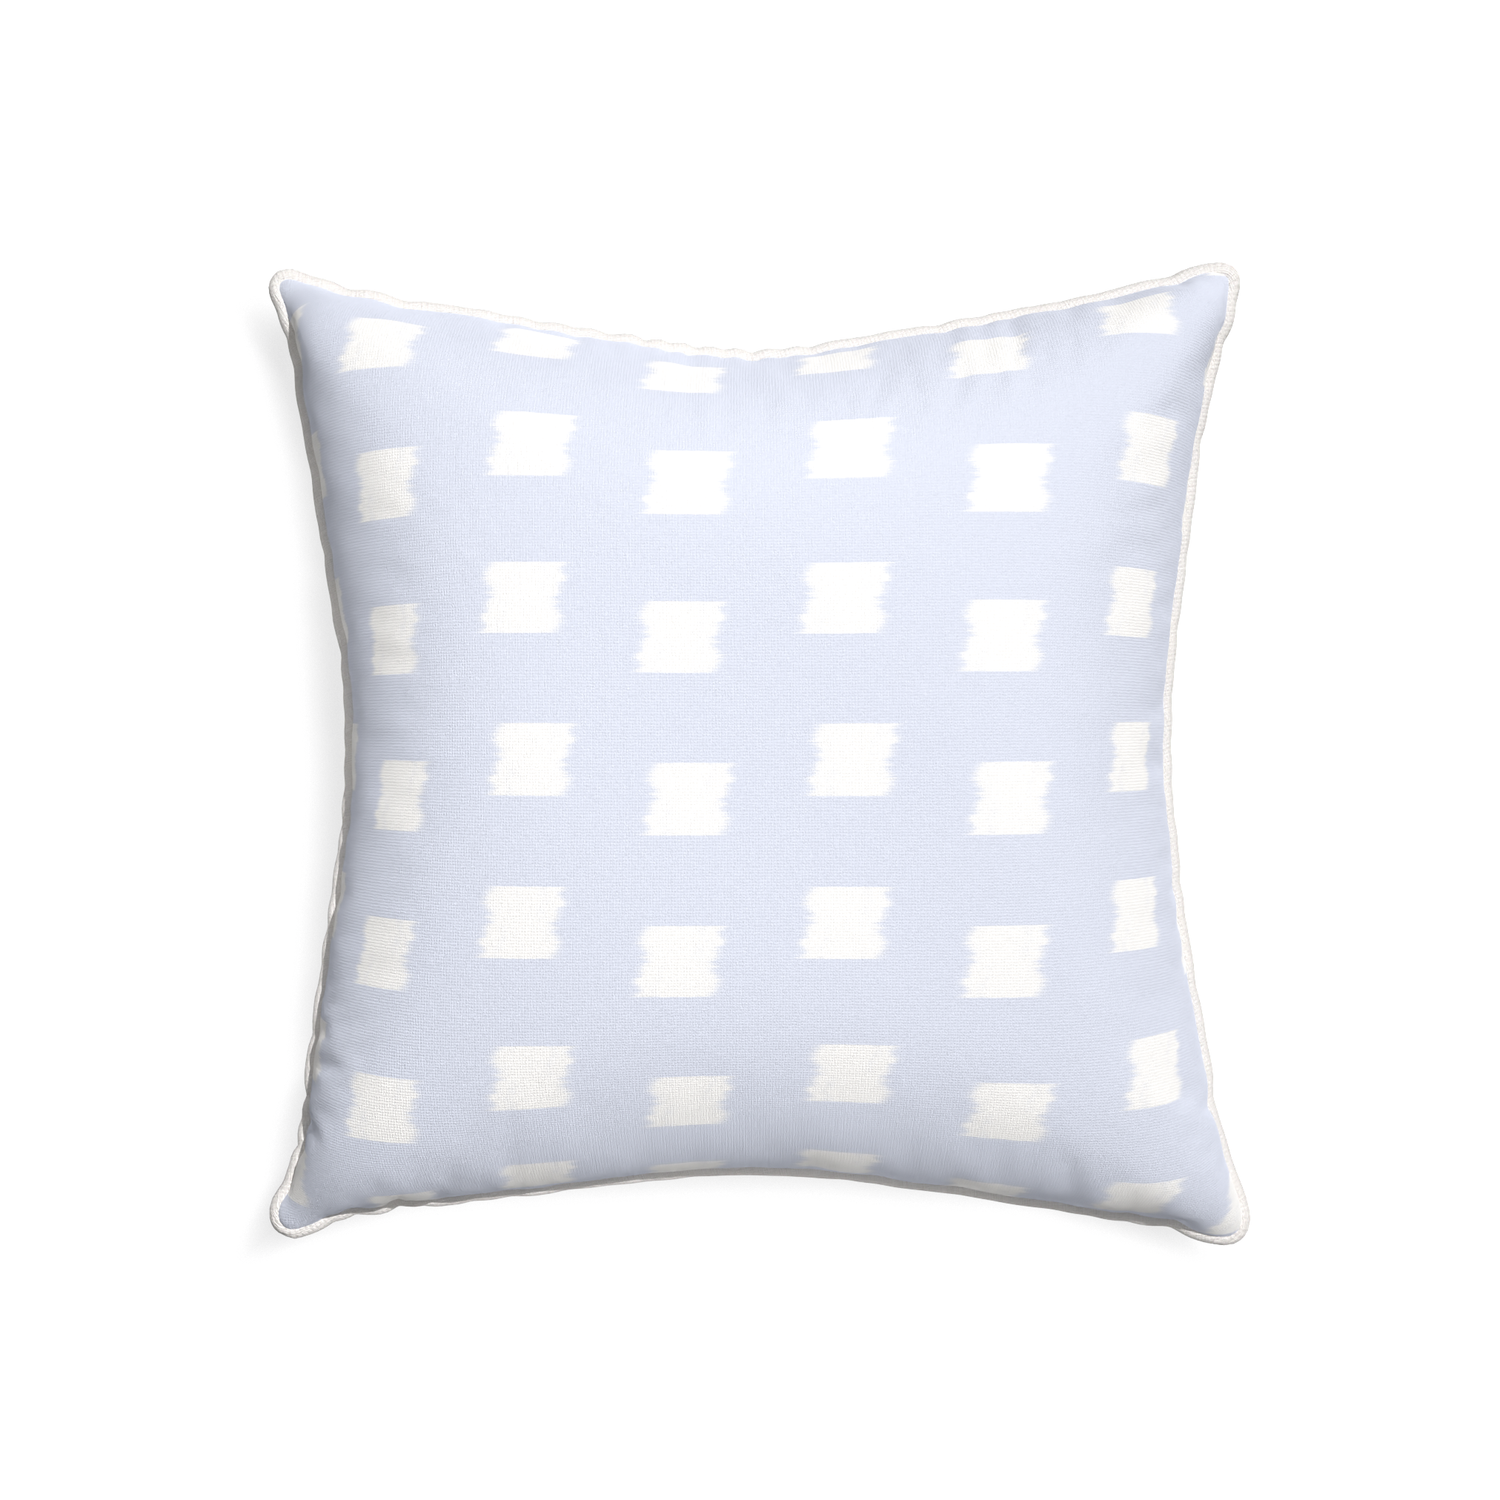 22-square denton custom sky blue patternpillow with snow piping on white background